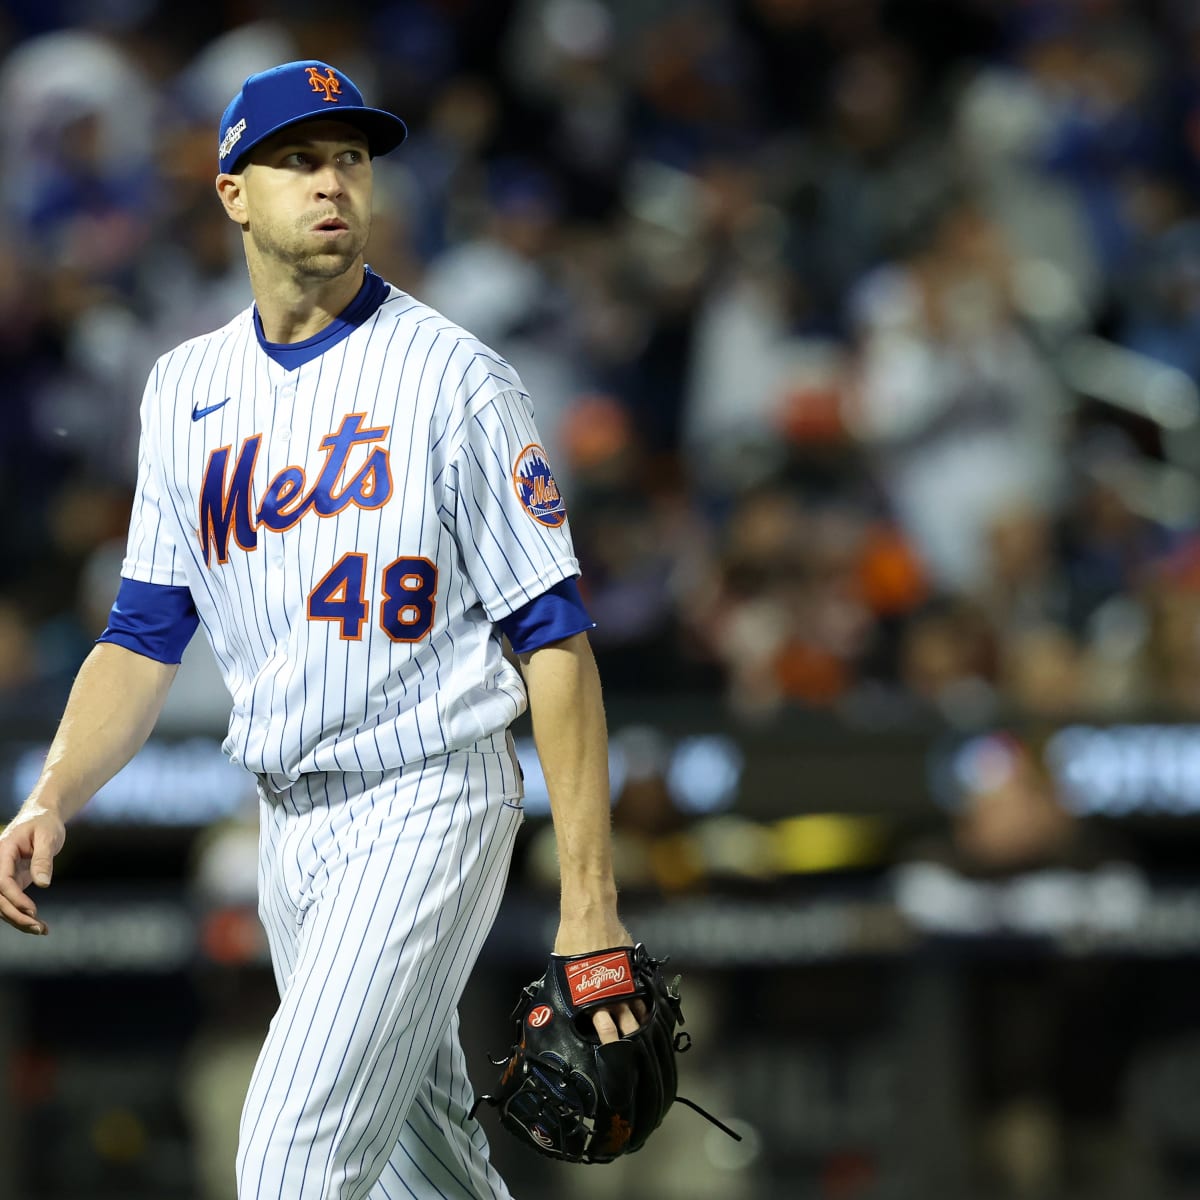 Jacob deGrom leaves the New York Mets for the Texas Rangers